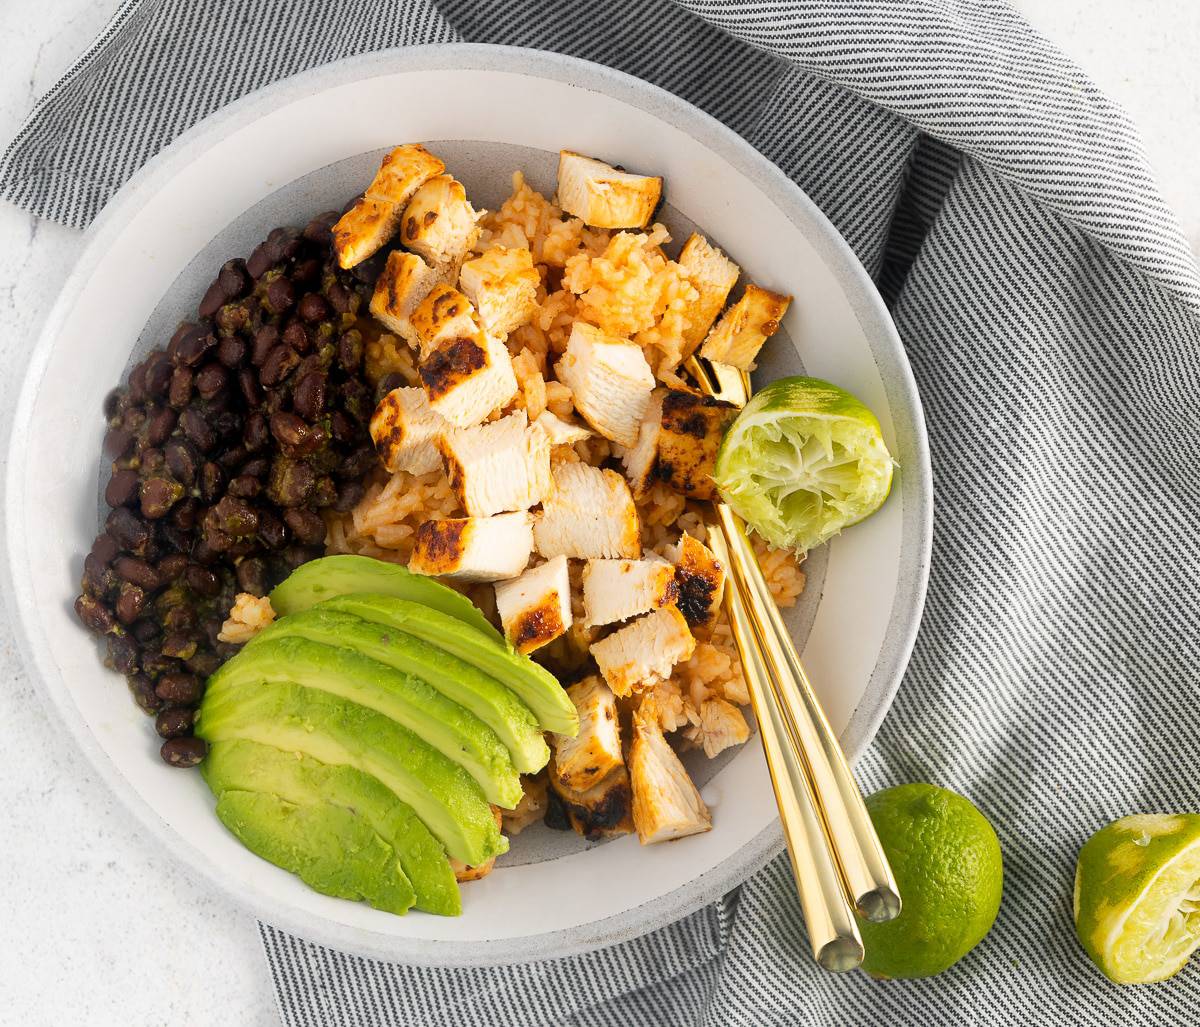 Chipotle lime chicken in a bowl with rice, beans and avocado